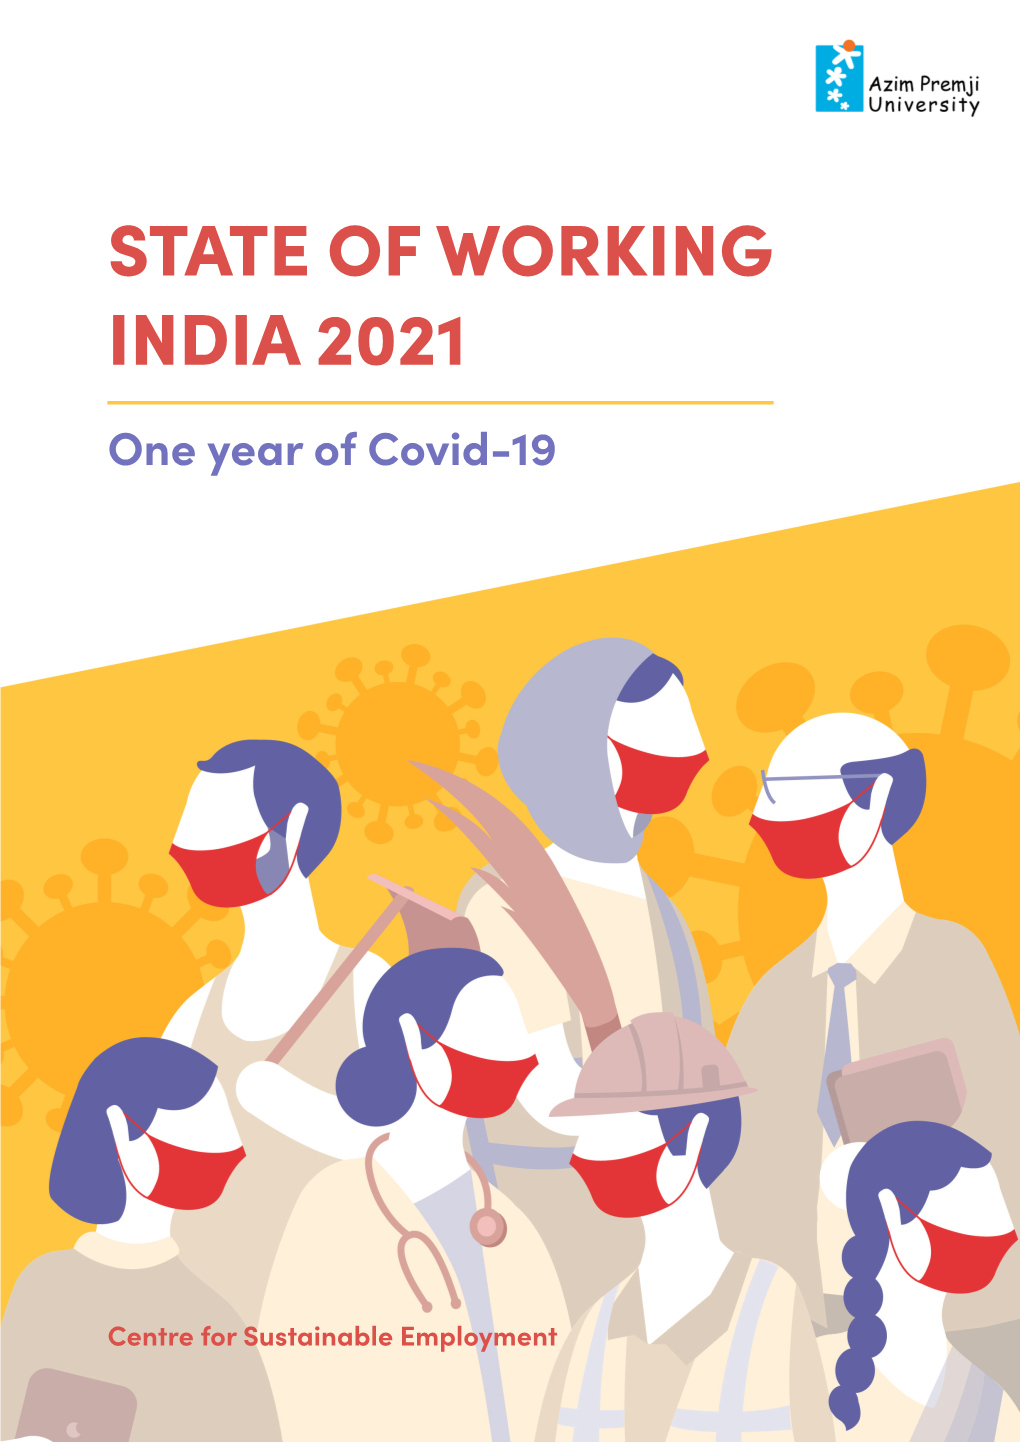 State of Working India 2021: One Year of Covid-19, Centre for Sustainable Employment, Azim Premji University